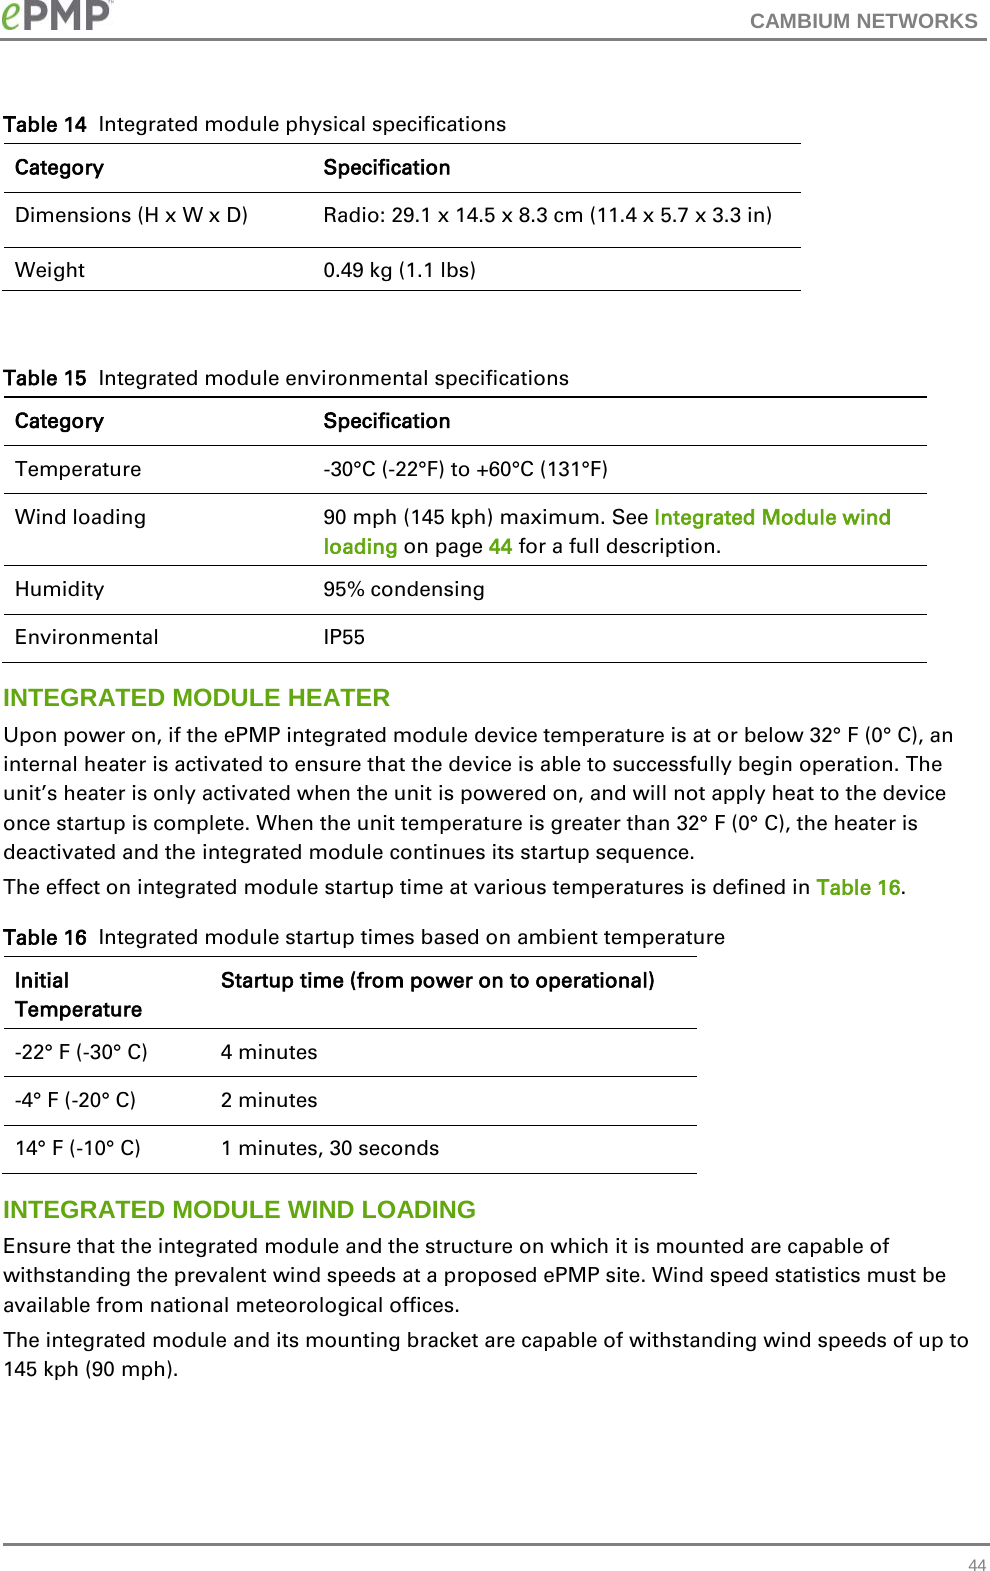 CAMBIUM NETWORKS  Table 14  Integrated module physical specifications Category Specification Dimensions (H x W x D)   Radio: 29.1 x 14.5 x 8.3 cm (11.4 x 5.7 x 3.3 in) Weight  0.49 kg (1.1 lbs)  Table 15  Integrated module environmental specifications Category Specification Temperature   -30°C (-22°F) to +60°C (131°F) Wind loading  90 mph (145 kph) maximum. See Integrated Module wind loading on page 44 for a full description. Humidity  95% condensing Environmental IP55 INTEGRATED MODULE HEATER Upon power on, if the ePMP integrated module device temperature is at or below 32° F (0° C), an internal heater is activated to ensure that the device is able to successfully begin operation. The unit’s heater is only activated when the unit is powered on, and will not apply heat to the device once startup is complete. When the unit temperature is greater than 32° F (0° C), the heater is deactivated and the integrated module continues its startup sequence. The effect on integrated module startup time at various temperatures is defined in Table 16. Table 16  Integrated module startup times based on ambient temperature Initial Temperature Startup time (from power on to operational) -22° F (-30° C) 4 minutes -4° F (-20° C) 2 minutes 14° F (-10° C) 1 minutes, 30 seconds INTEGRATED MODULE WIND LOADING Ensure that the integrated module and the structure on which it is mounted are capable of withstanding the prevalent wind speeds at a proposed ePMP site. Wind speed statistics must be available from national meteorological offices. The integrated module and its mounting bracket are capable of withstanding wind speeds of up to 145 kph (90 mph).  44 